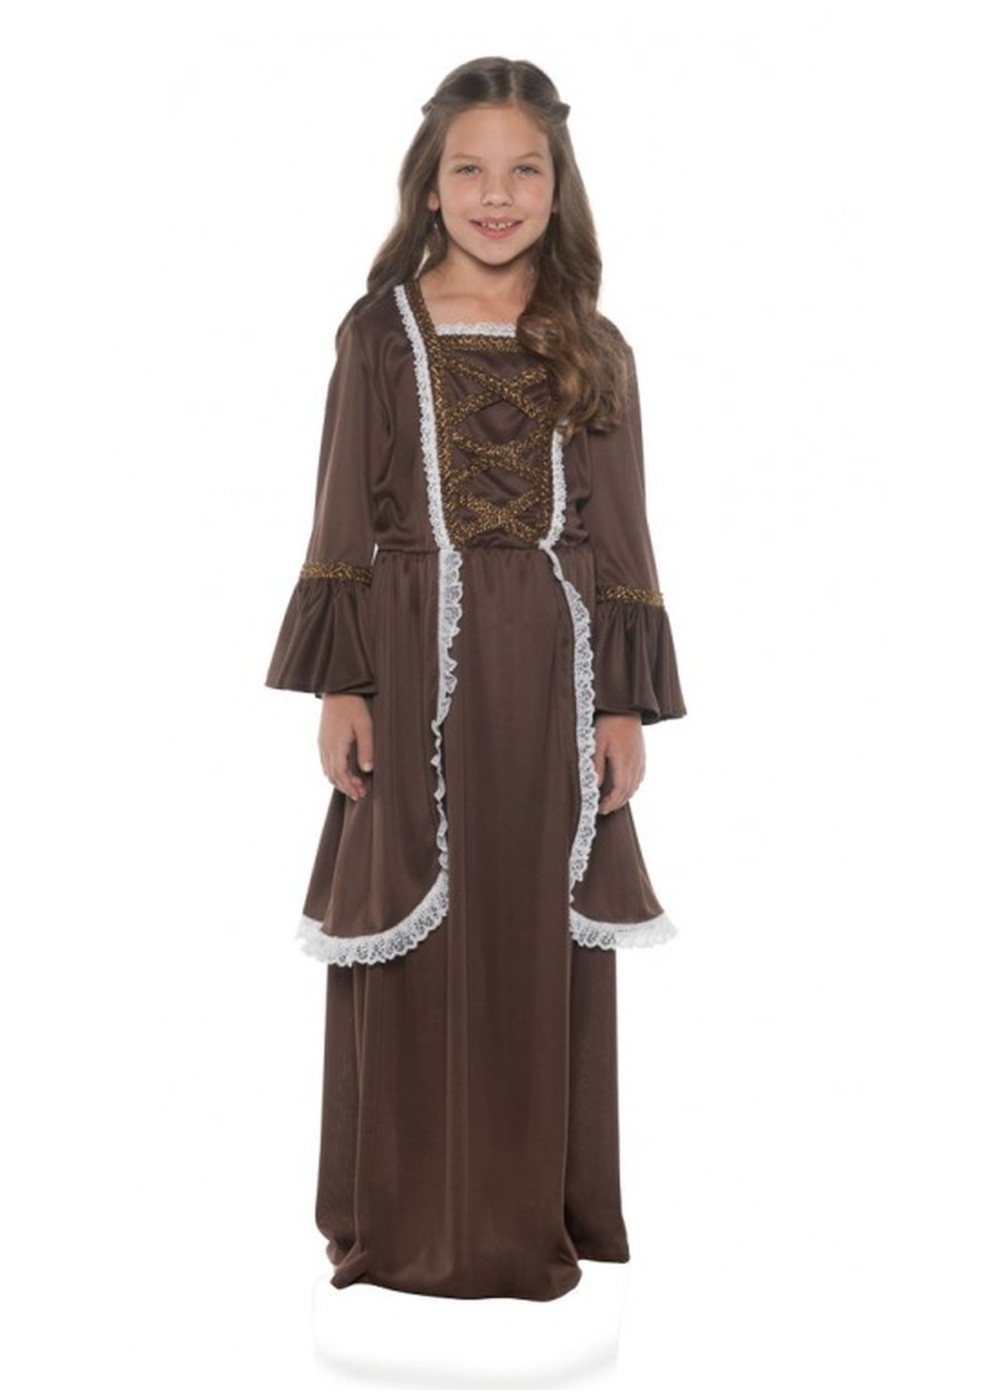 Kids Colonial Girl Costume